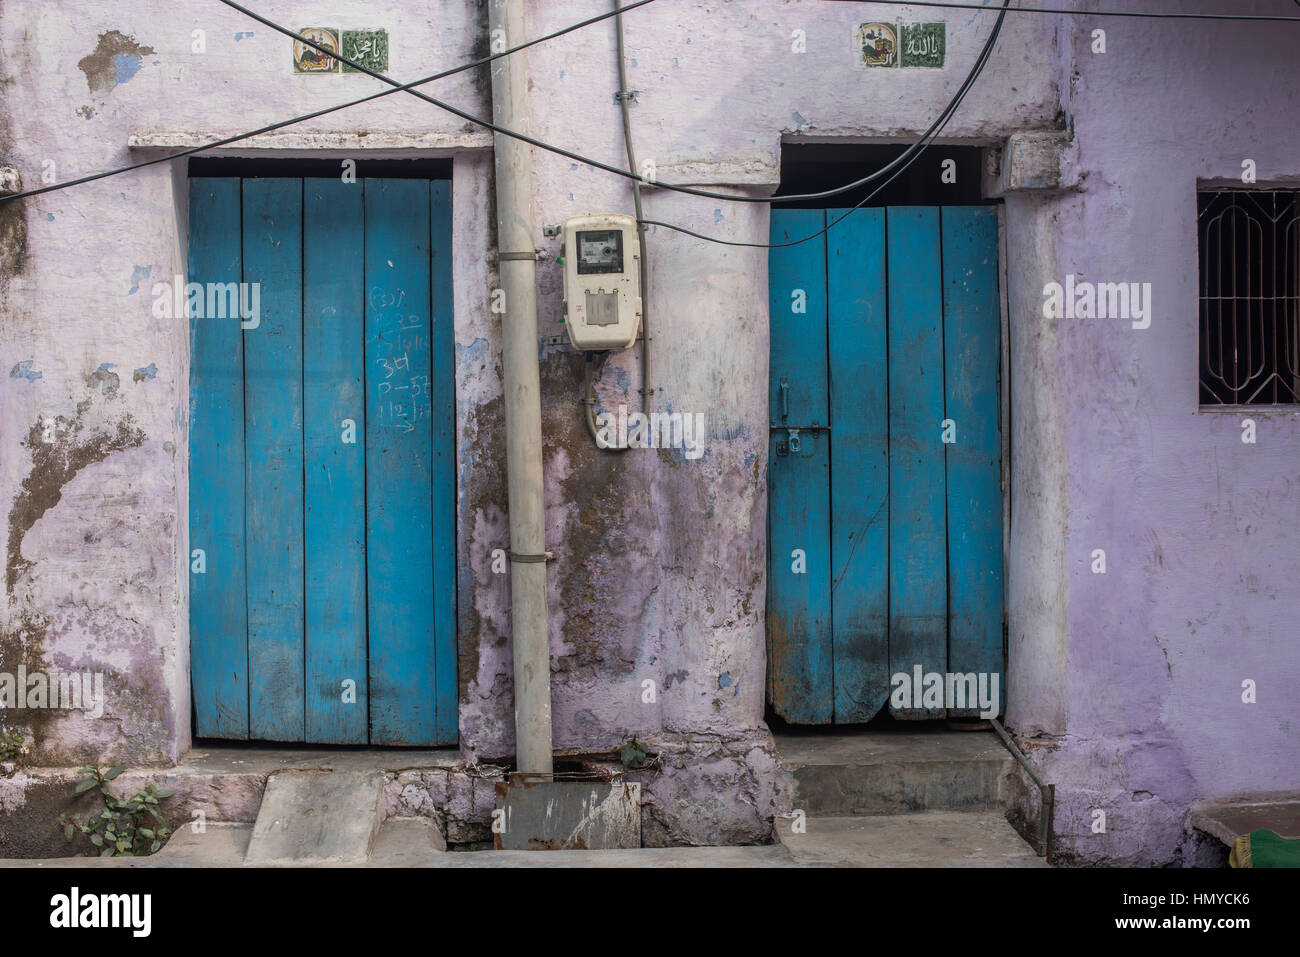 Two blue doors in a lilac painted building, Agra Stock Photo